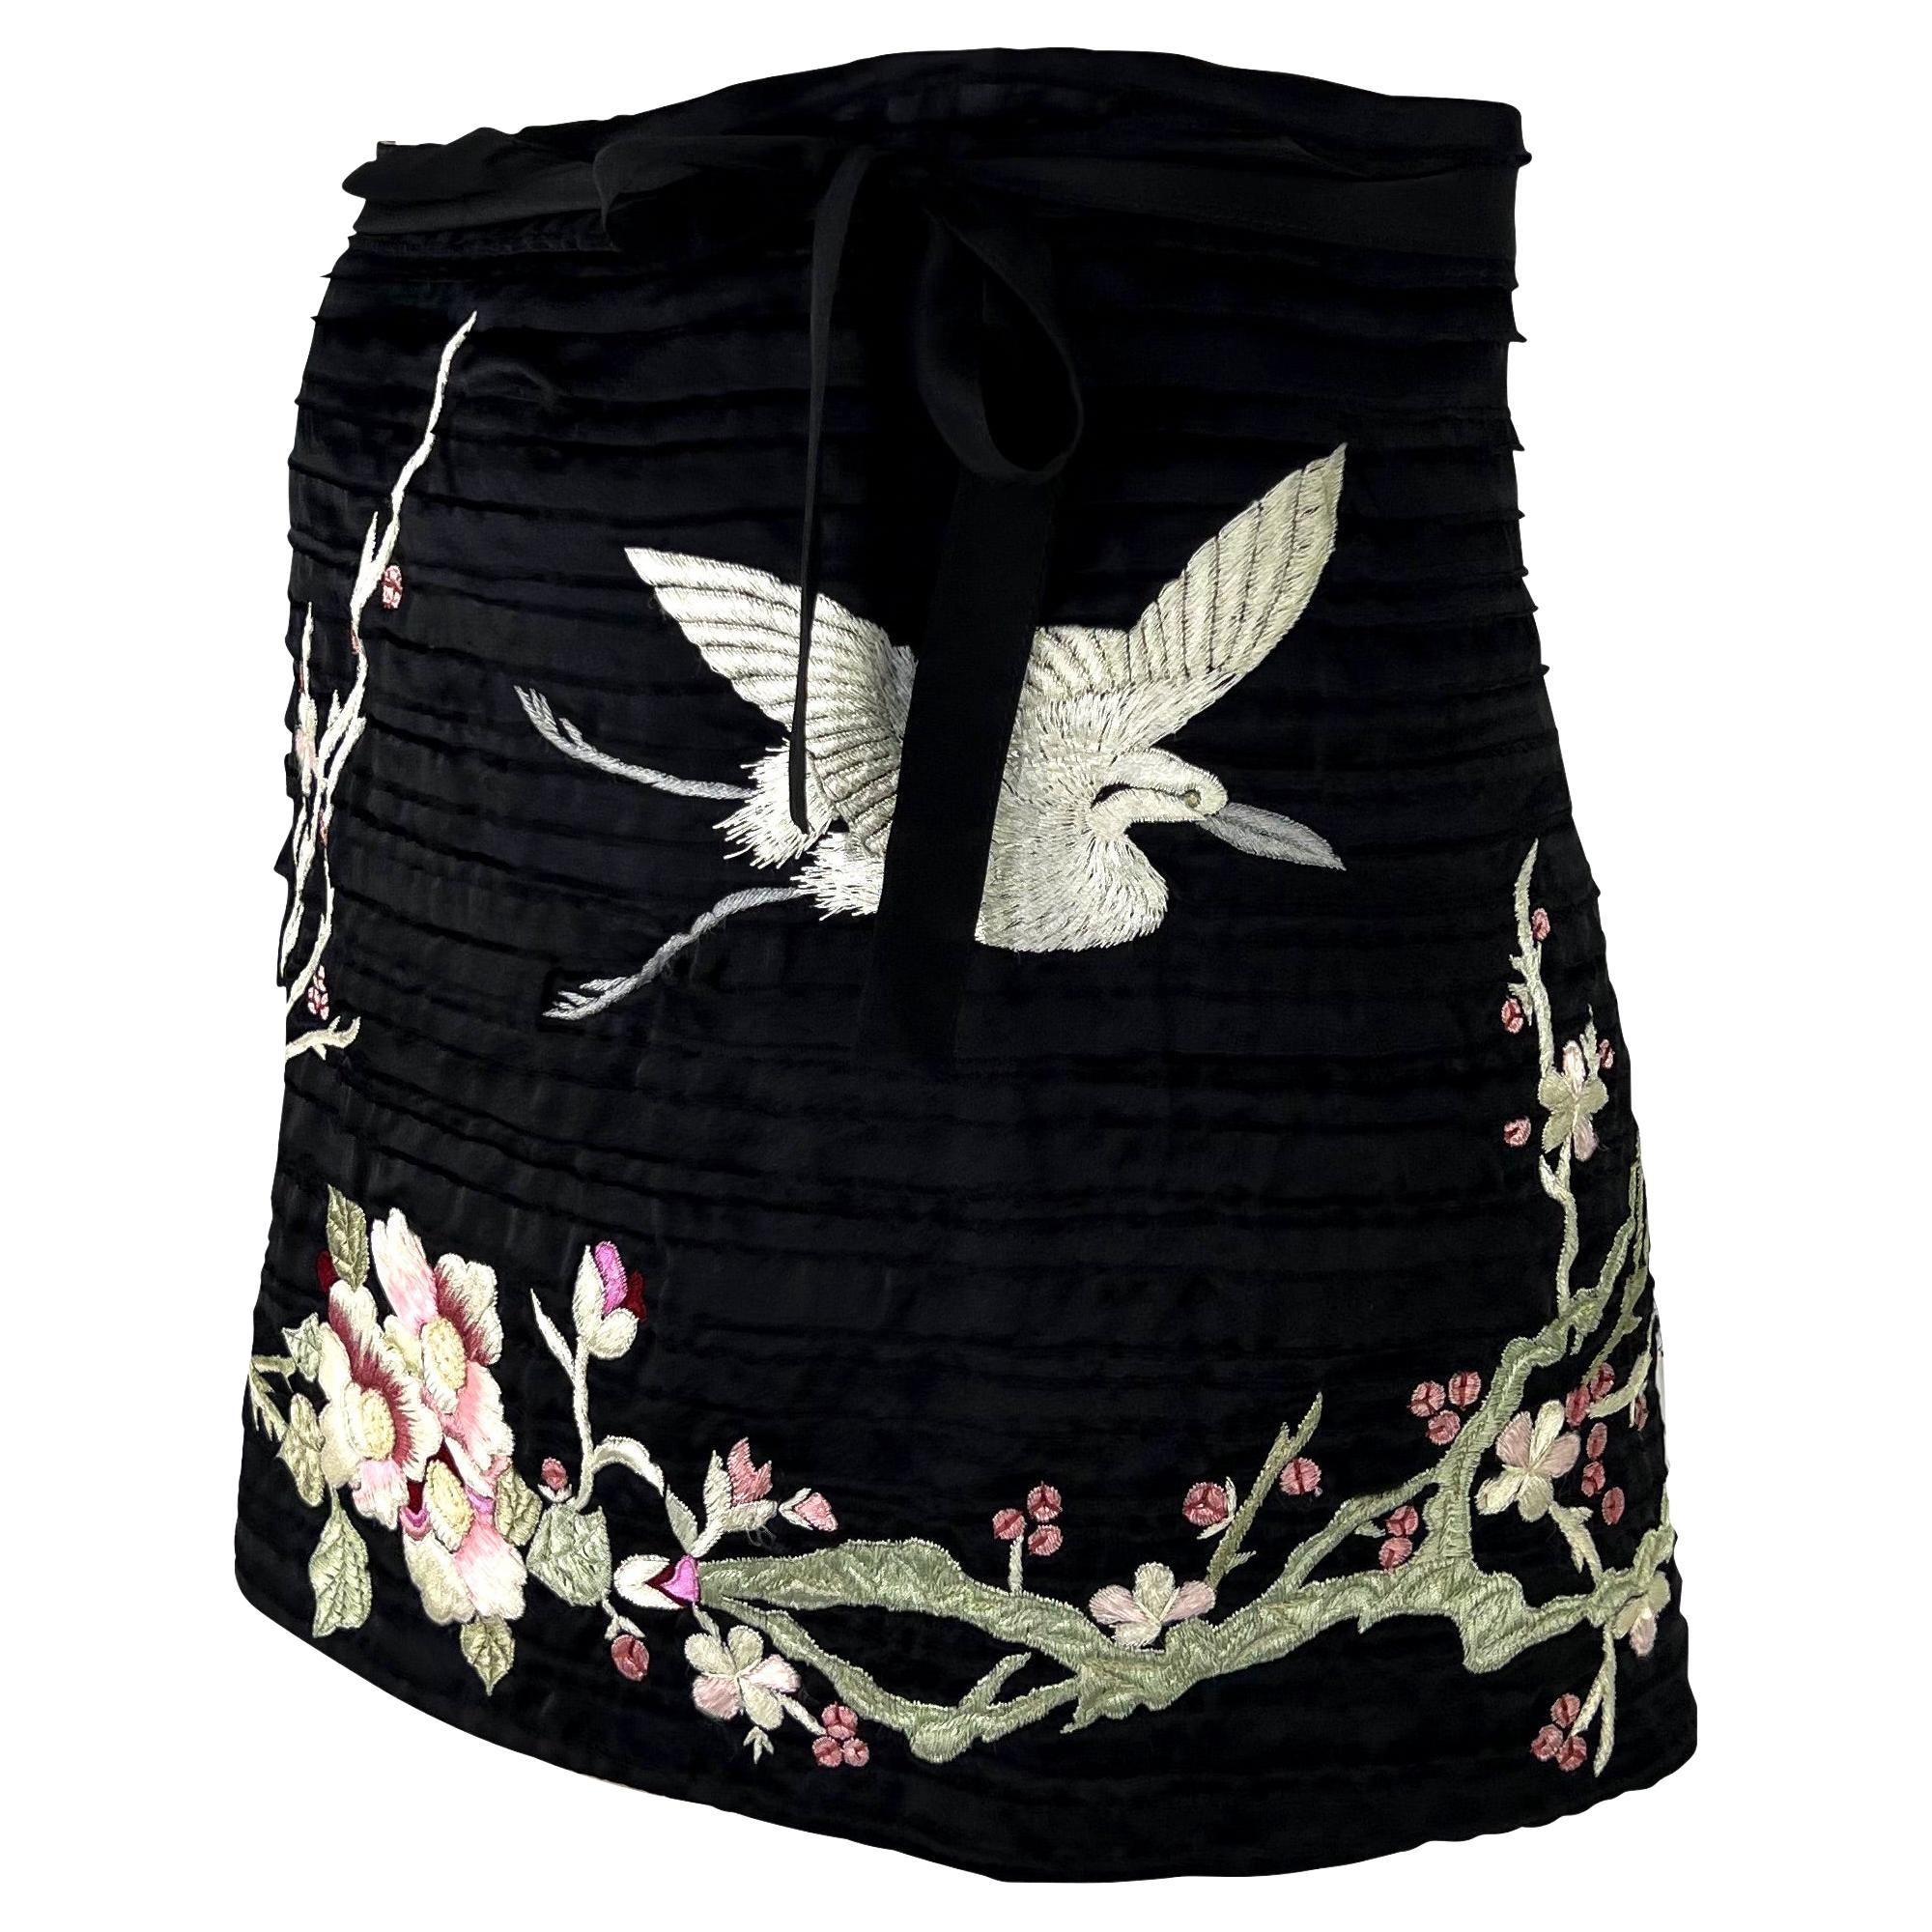 Women's S/S 2003 Gucci by Tom Ford Japanese Cherry Blossom Embroidered Mini Wrap Skirt